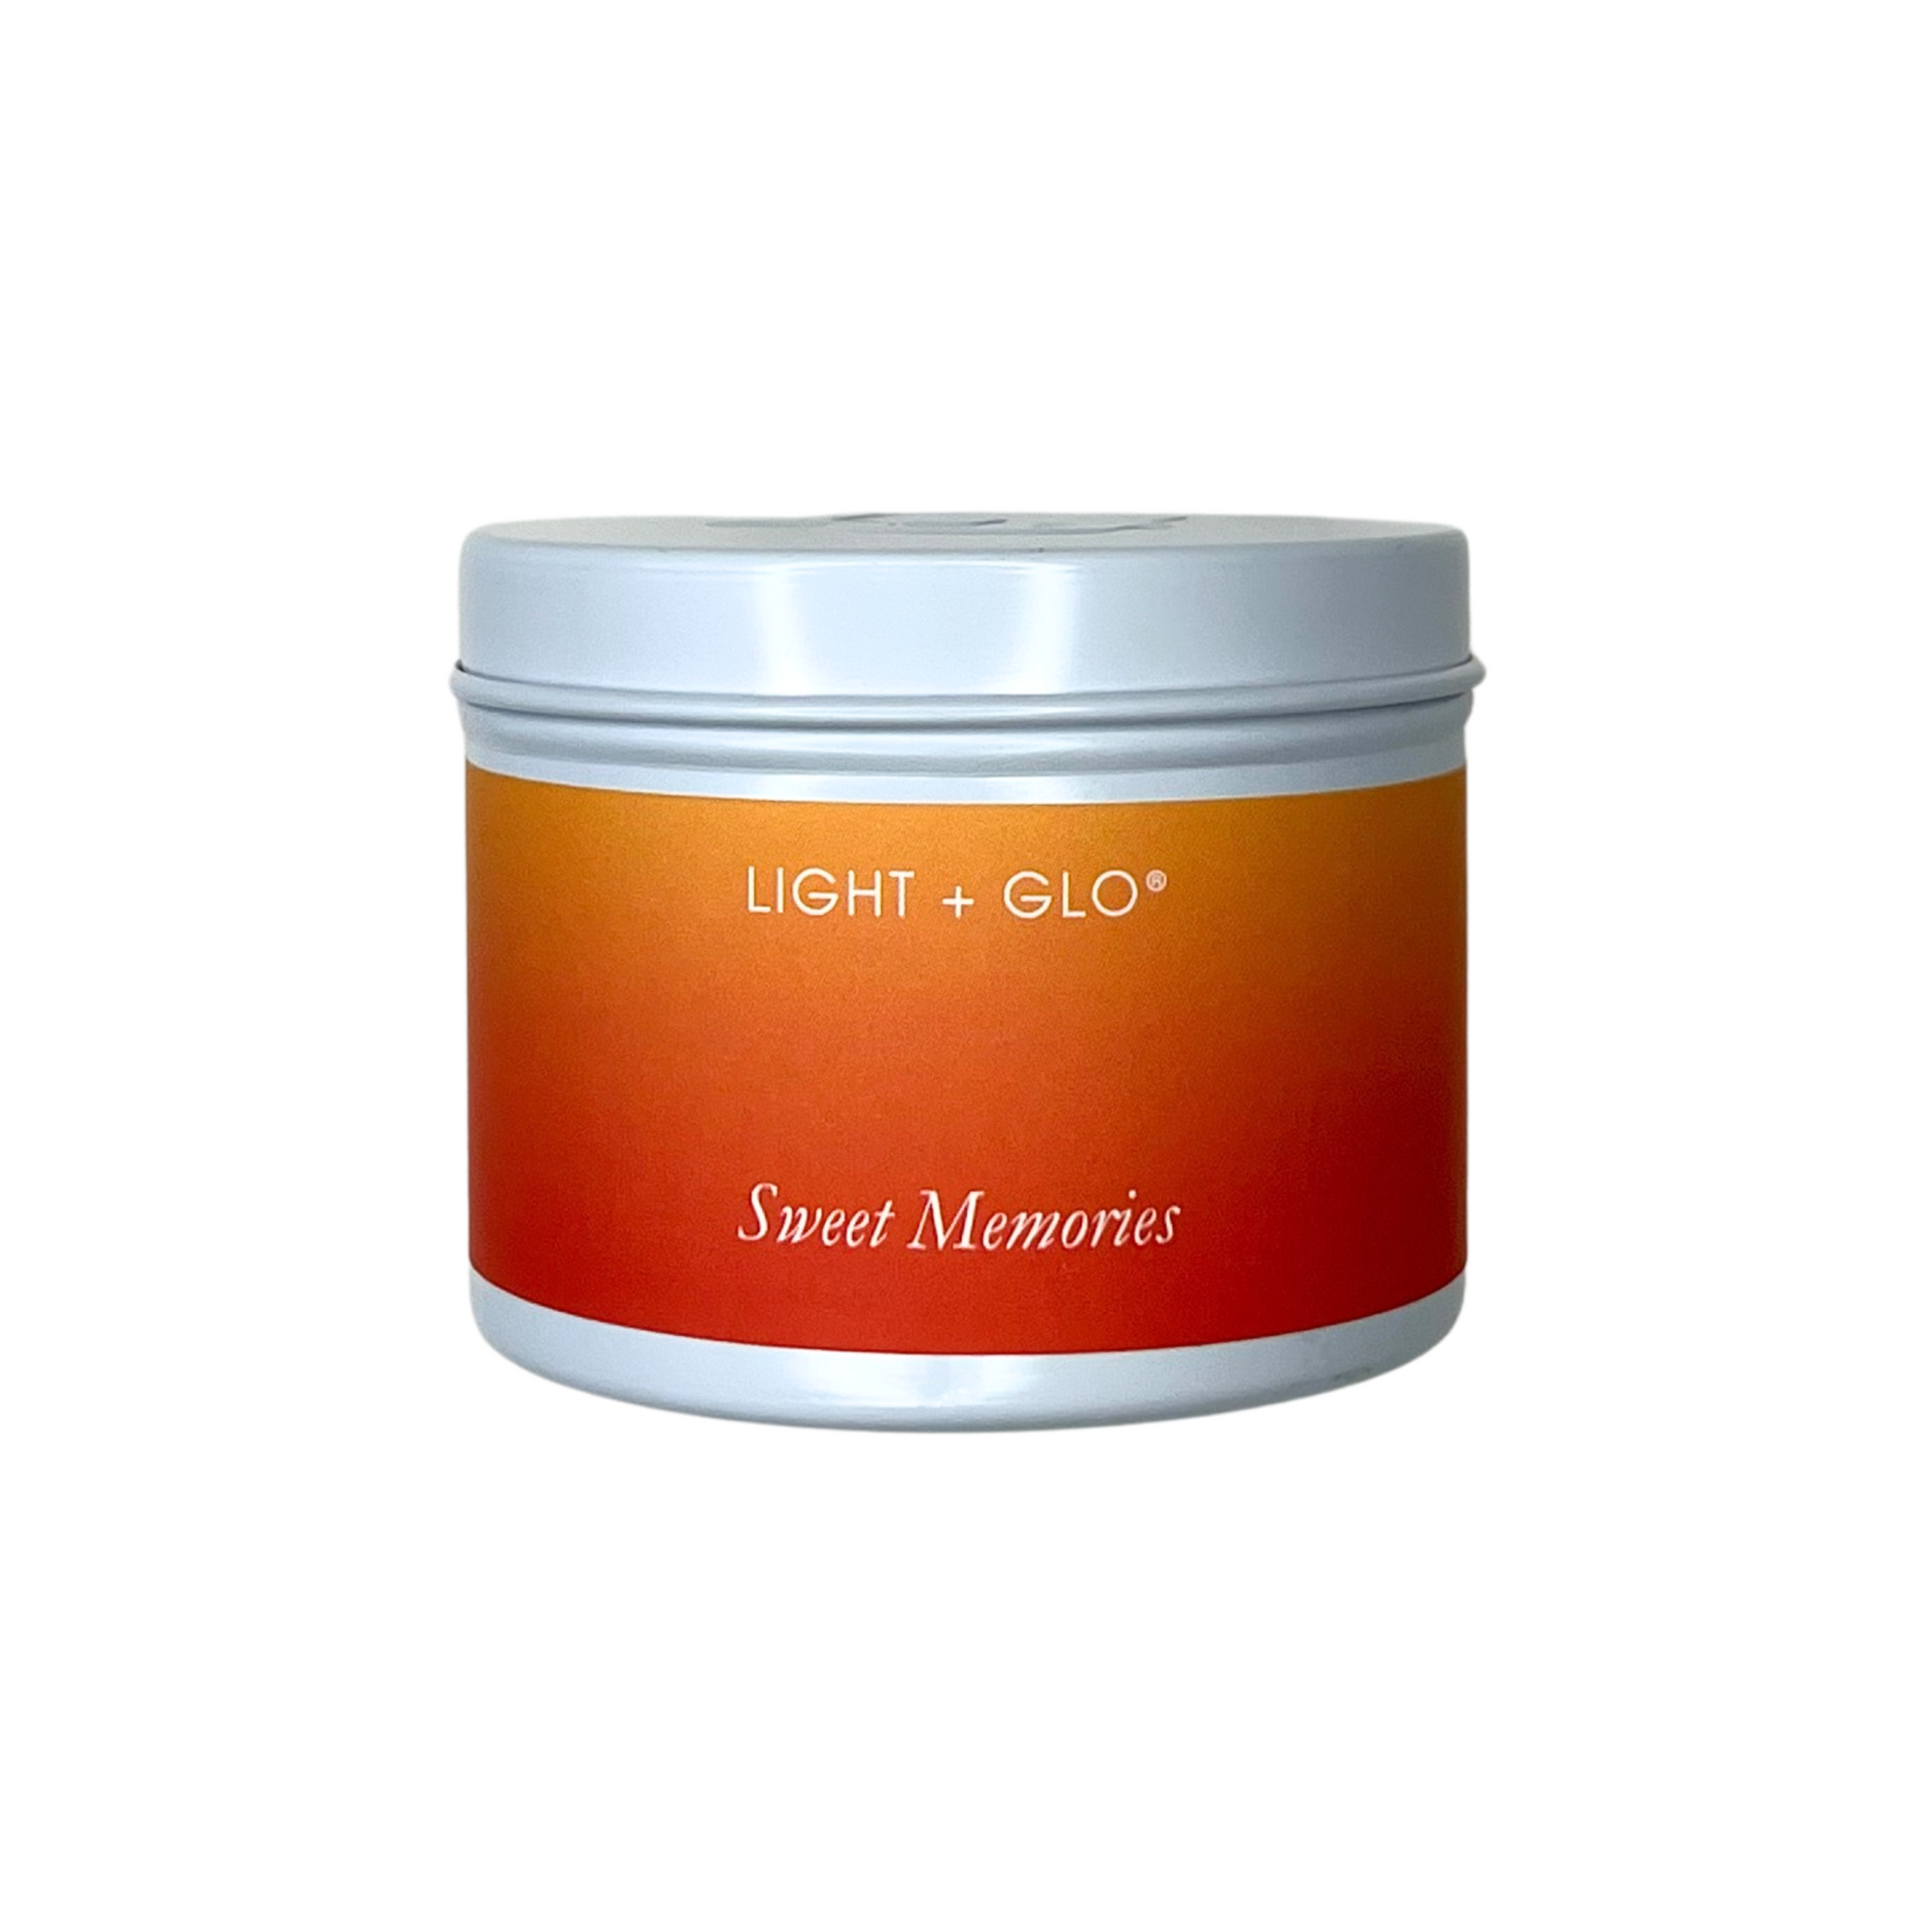 Santorini Travel Candle - Sweet Memories | Luxury Candles & Home Fragrances by Light + Glo